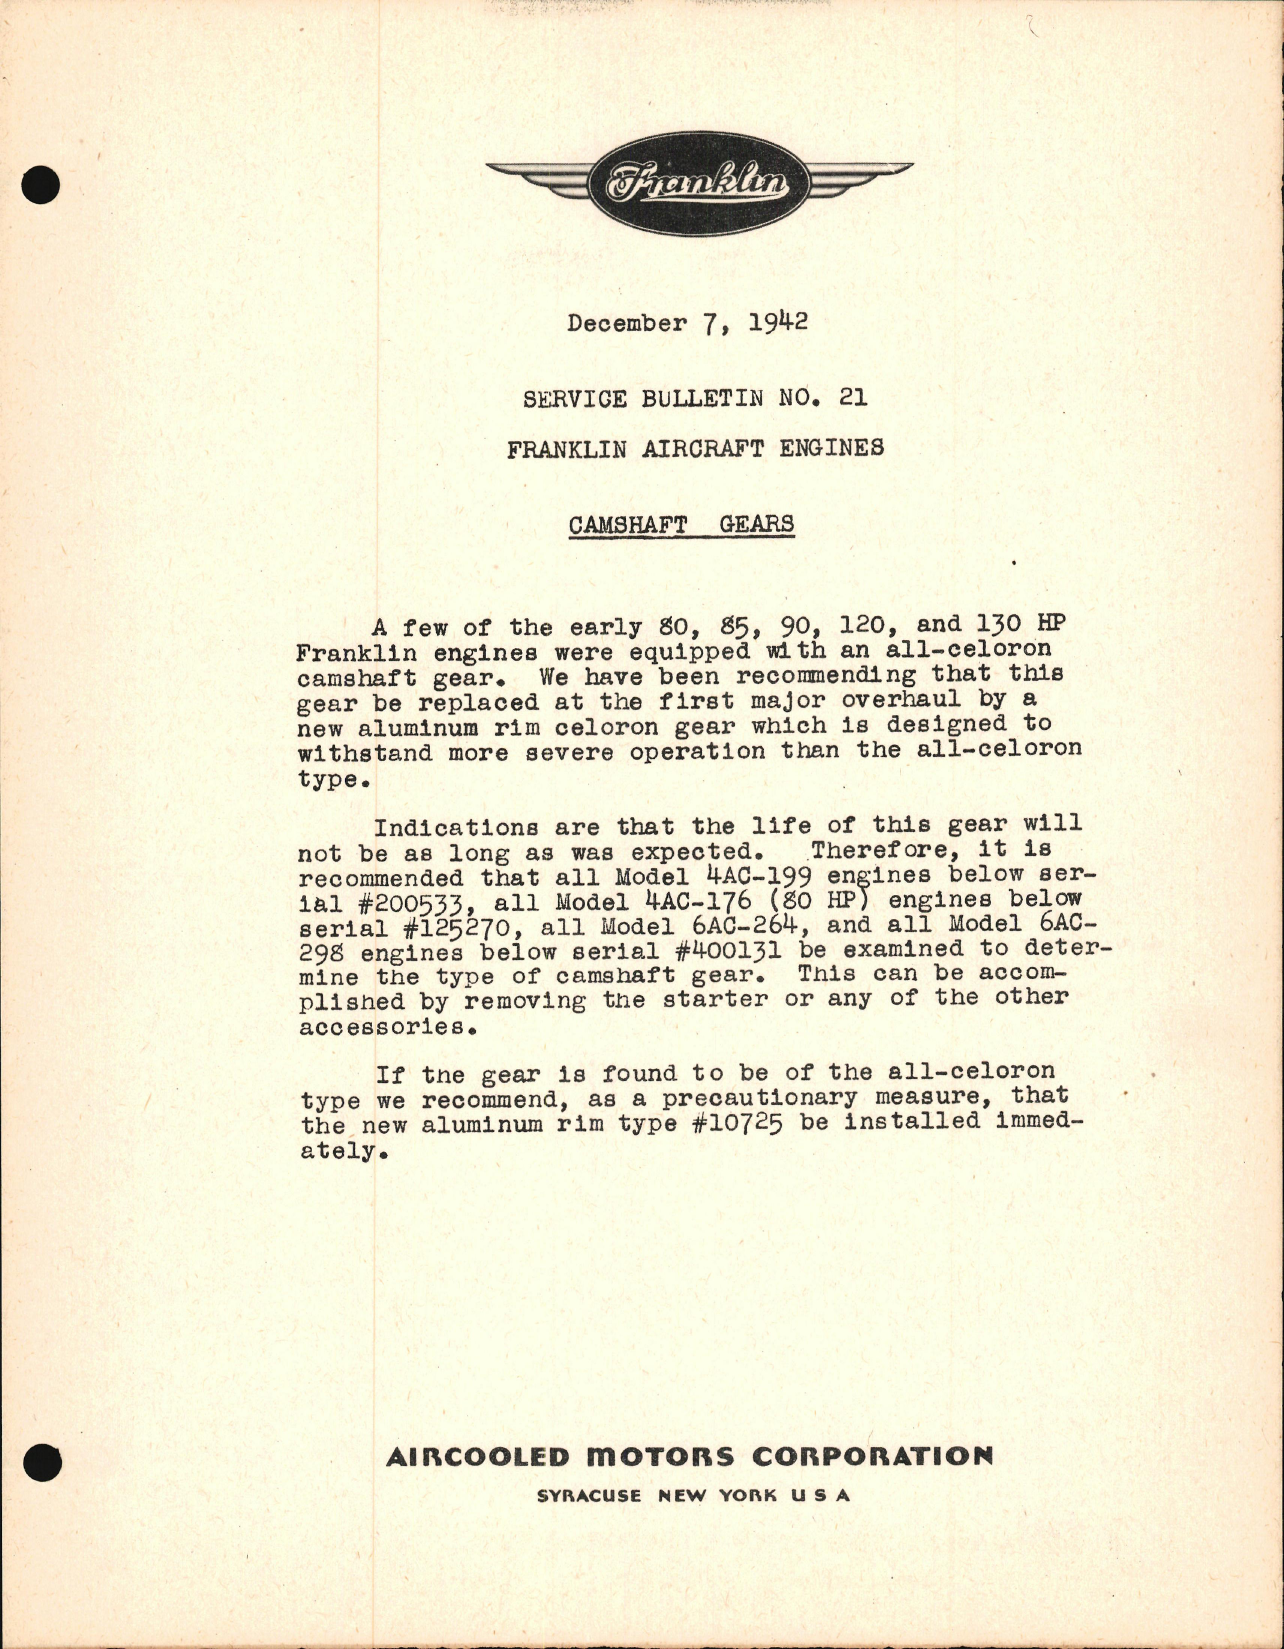 Sample page 1 from AirCorps Library document: Camshaft Gears